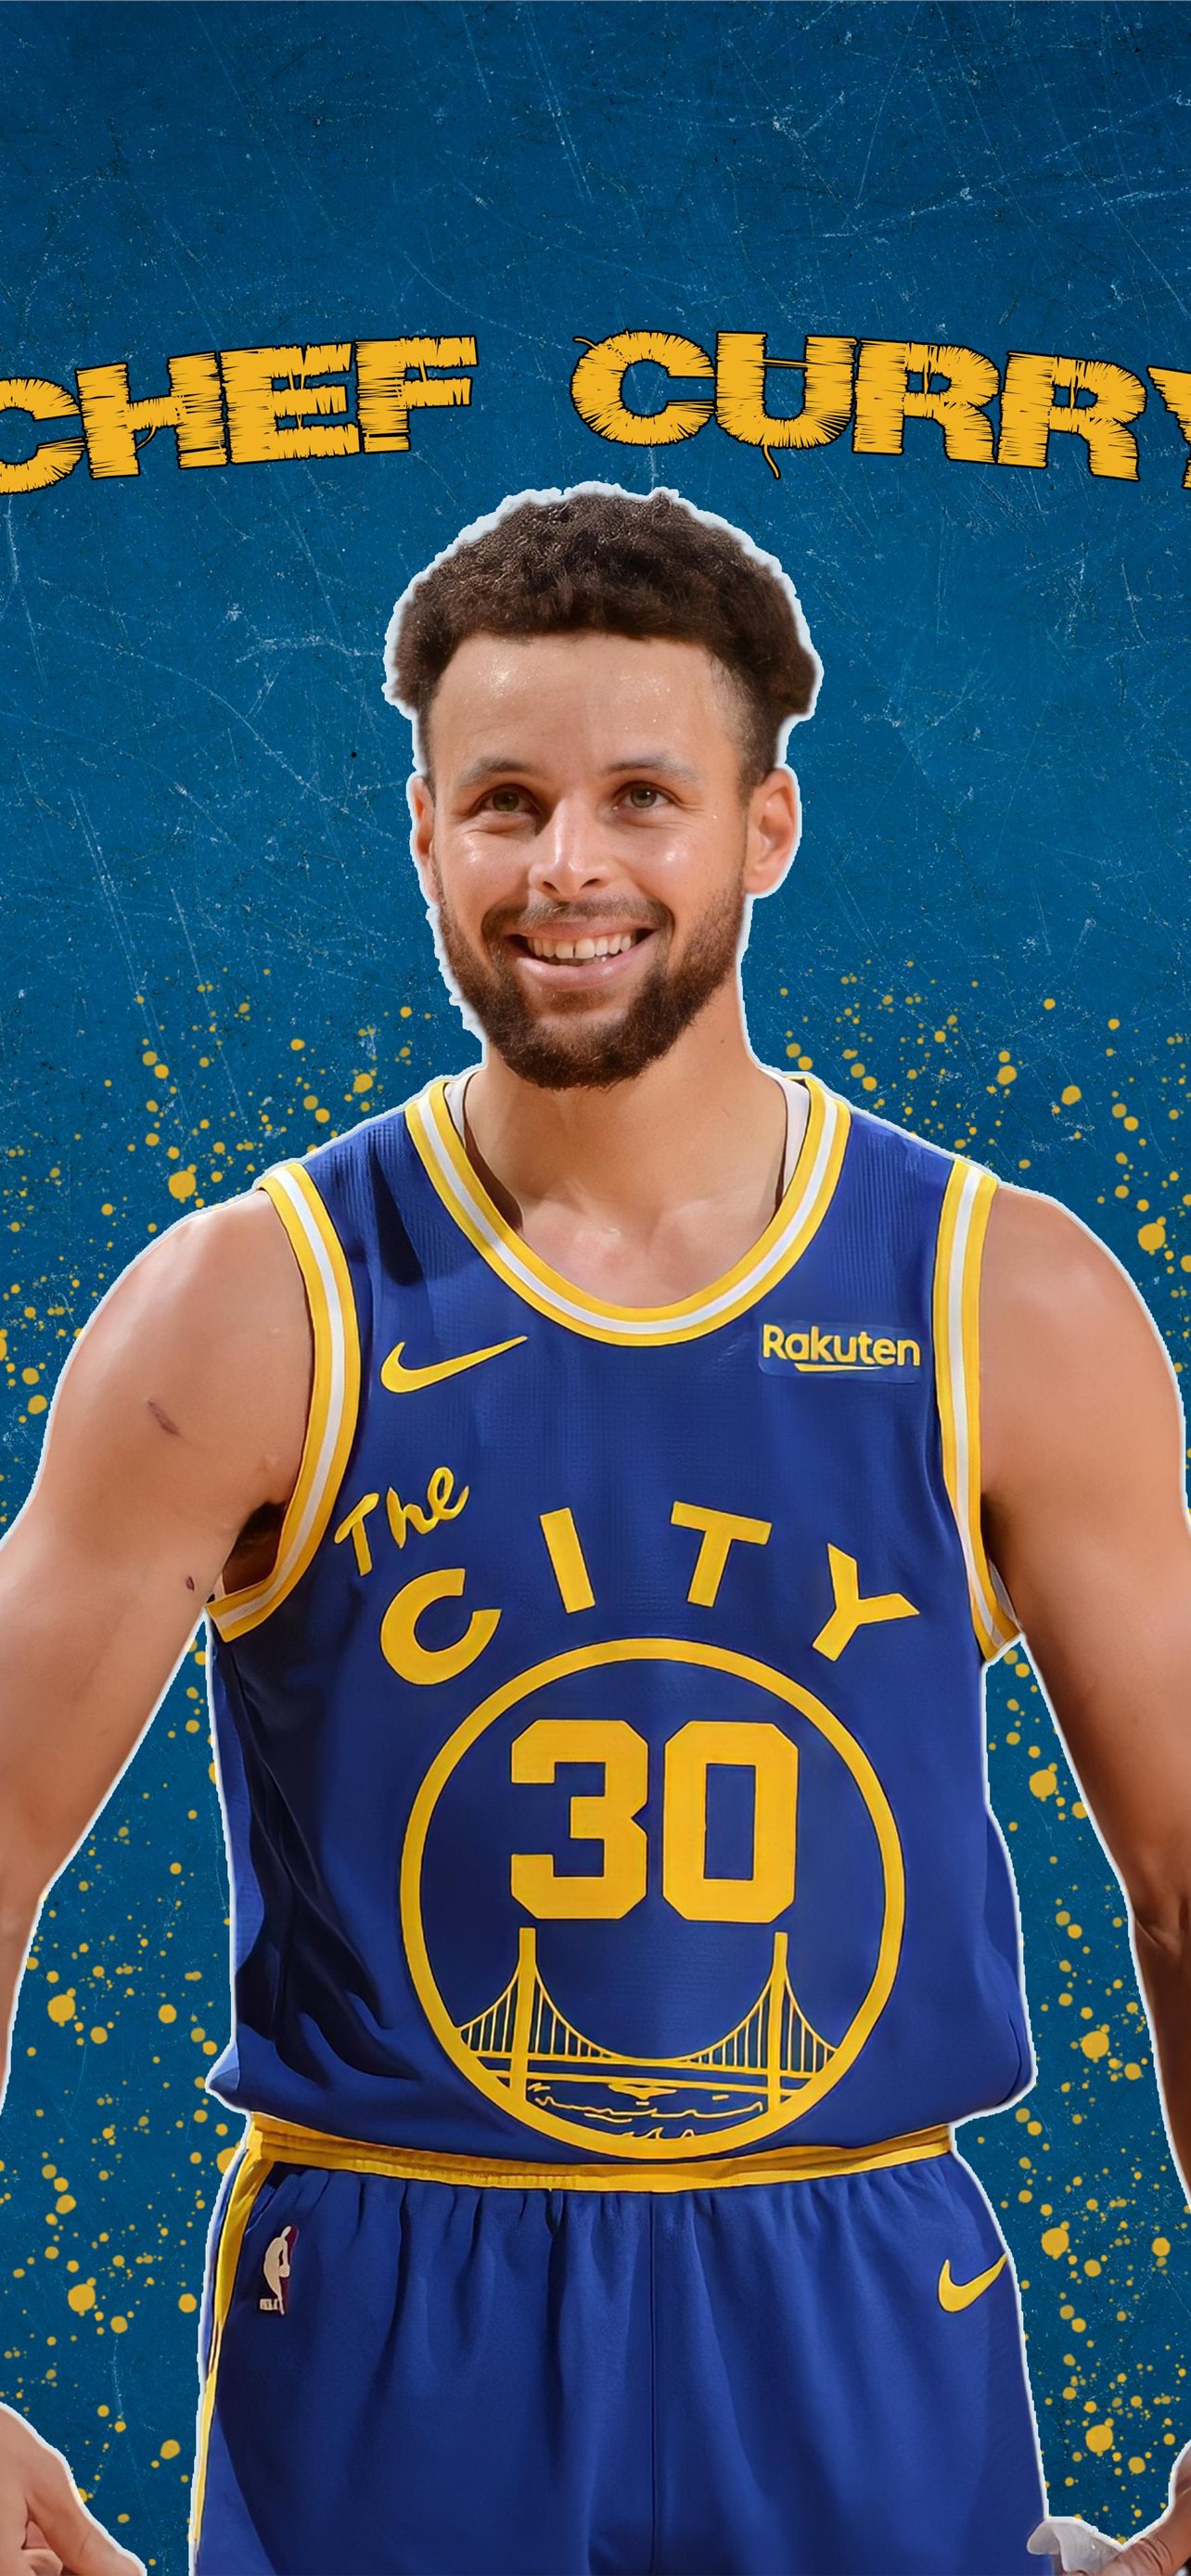 iphone steph curry